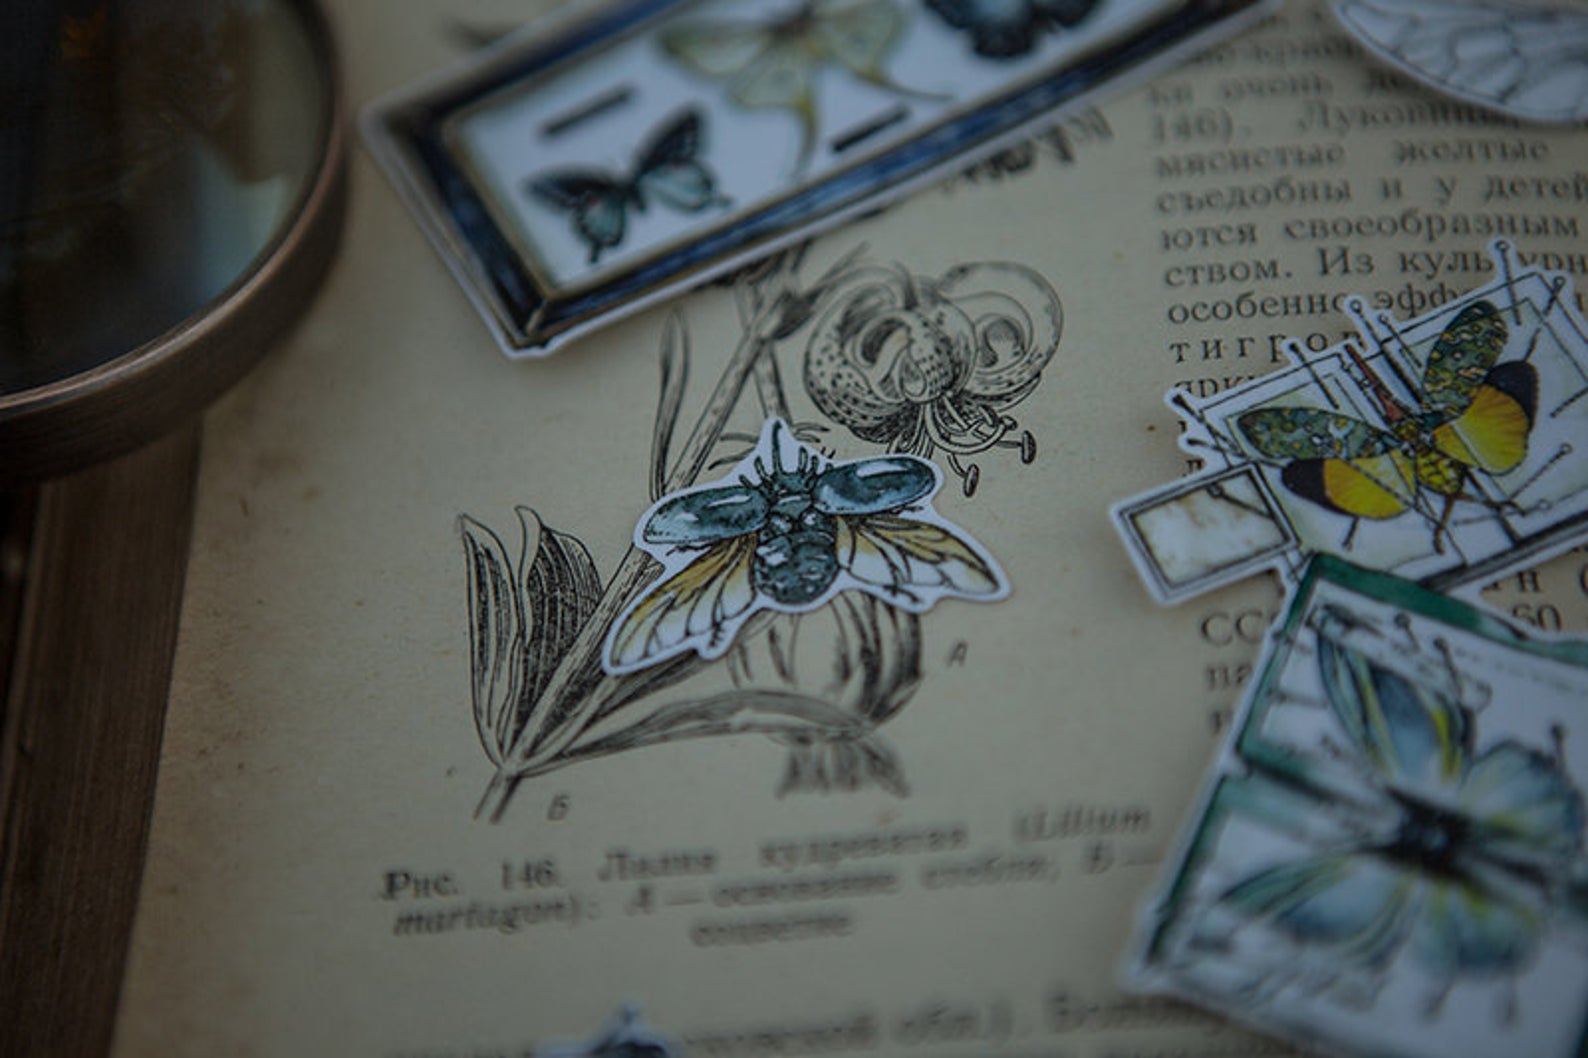 Specimen Collector Stickers Pack: Insects